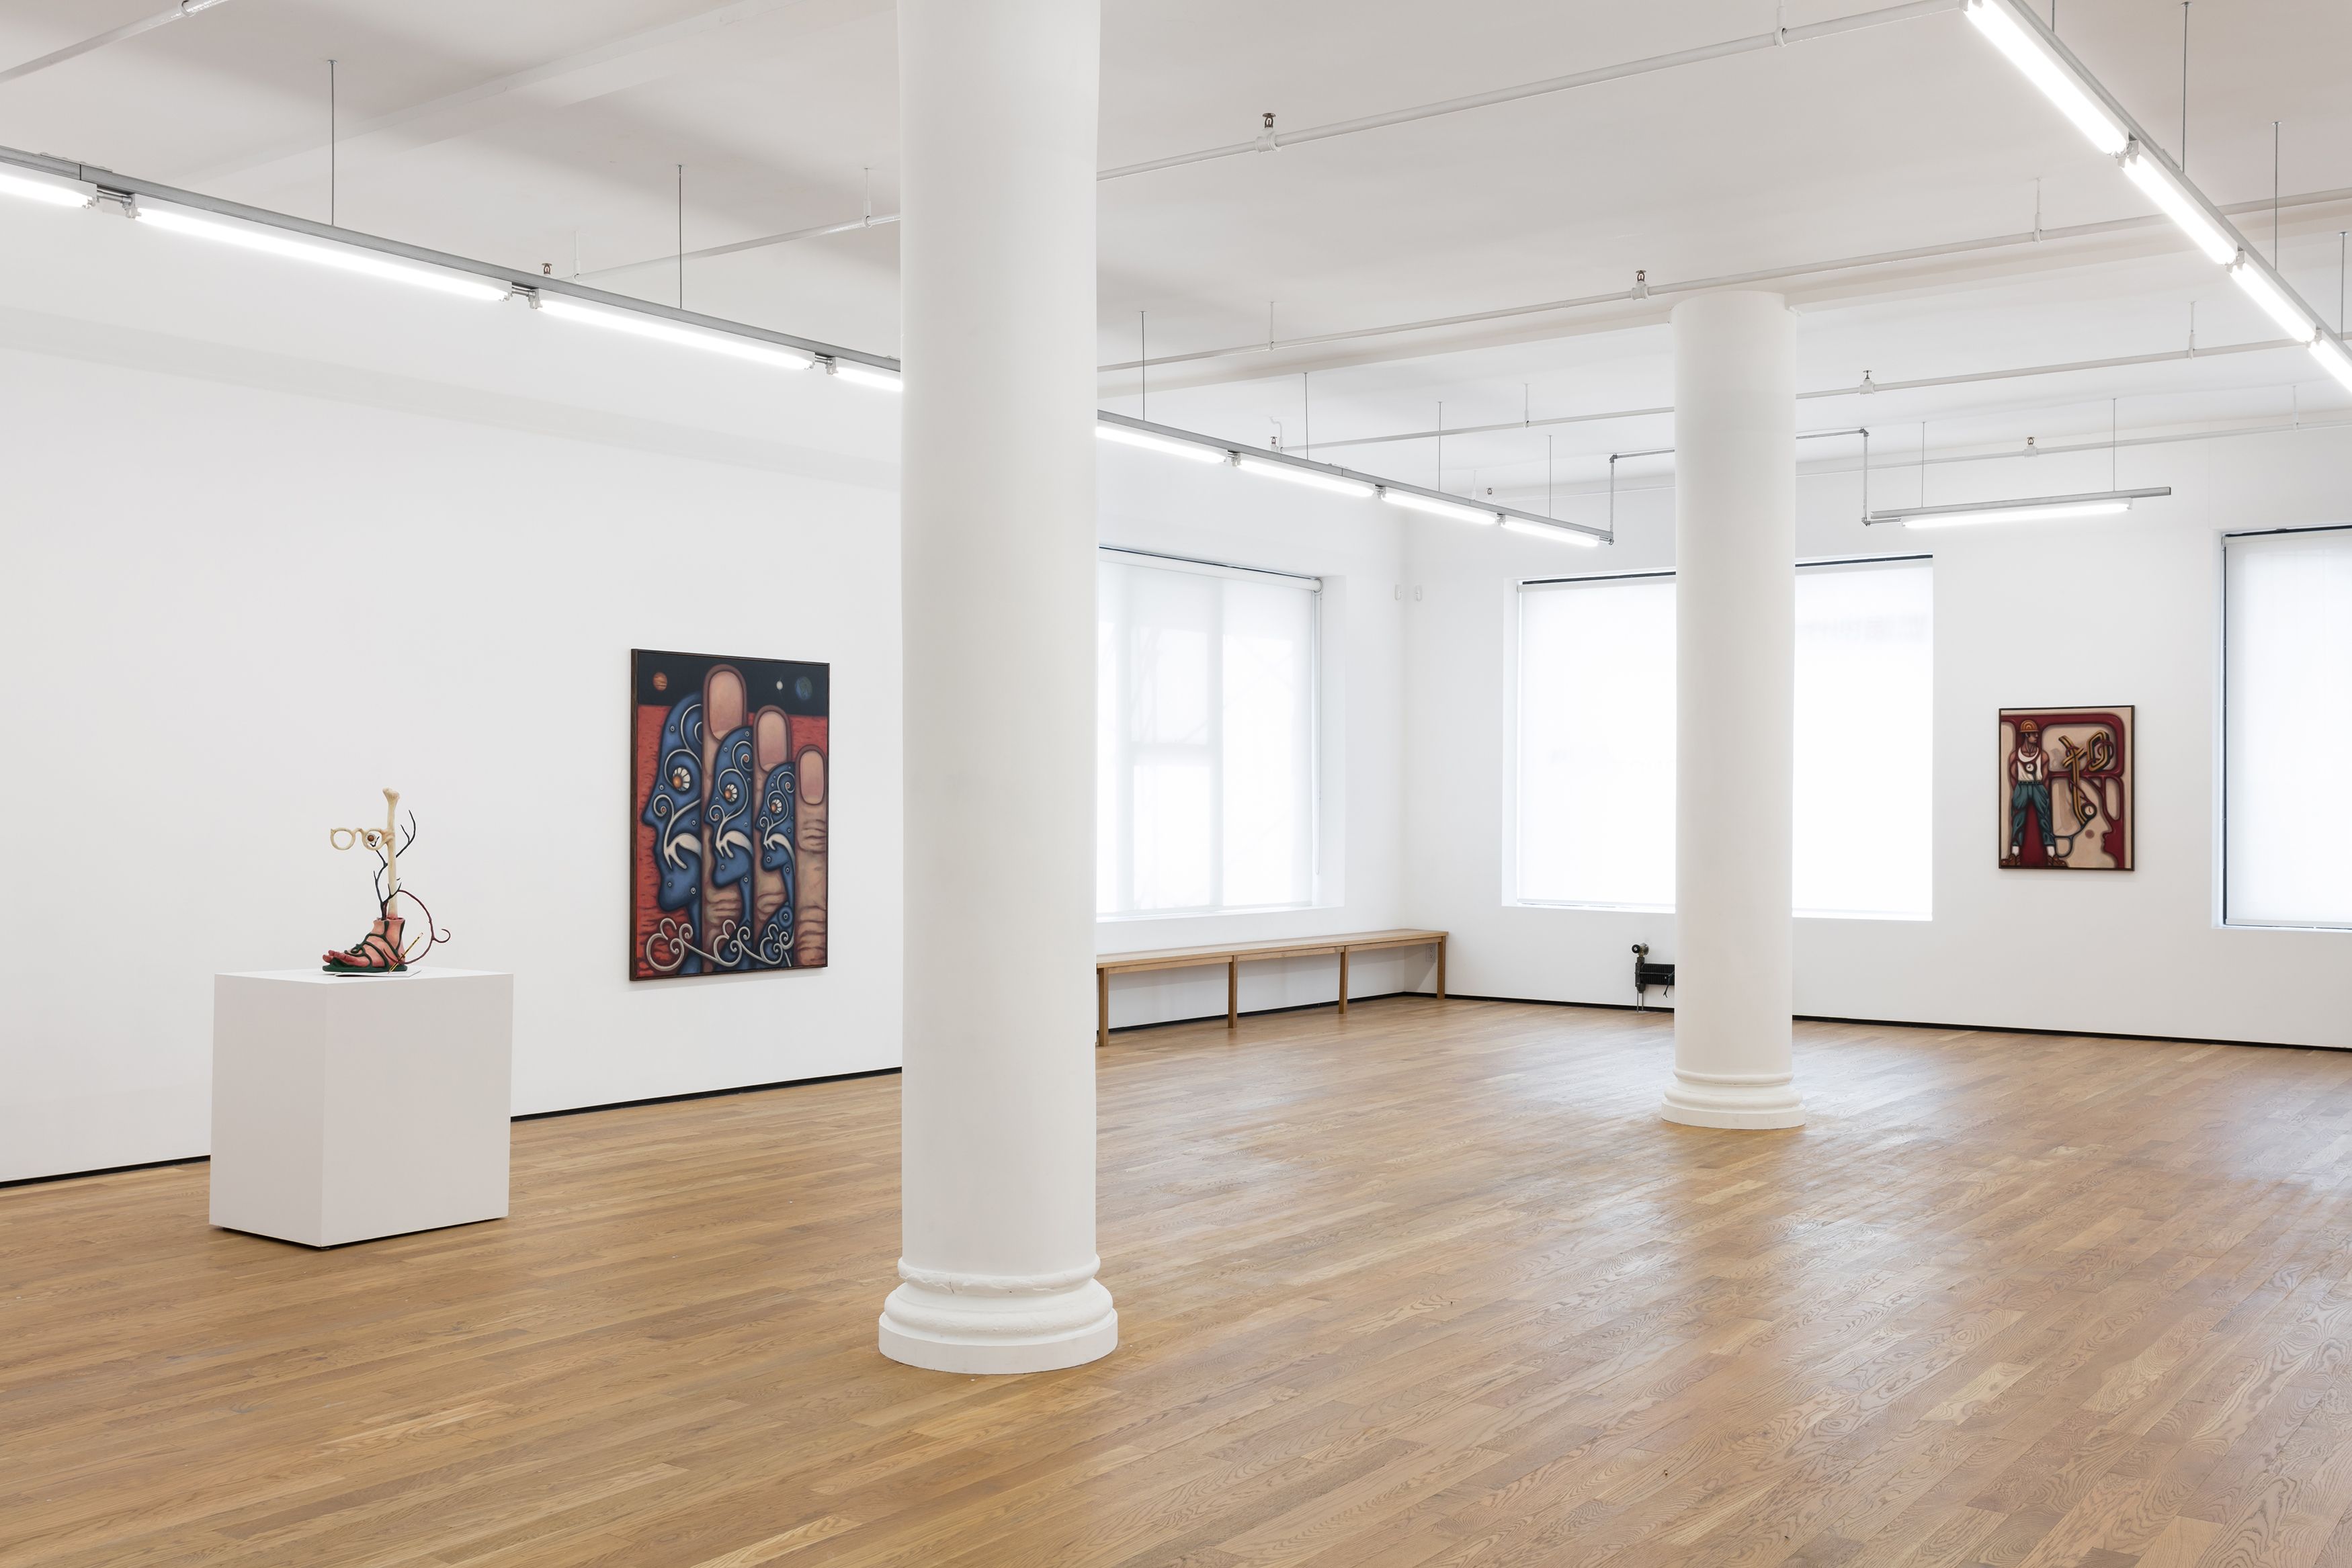 Justin Fitzpatrick, A Pulsation of the Artery, 2019, installation view, Foxy Production, New York.